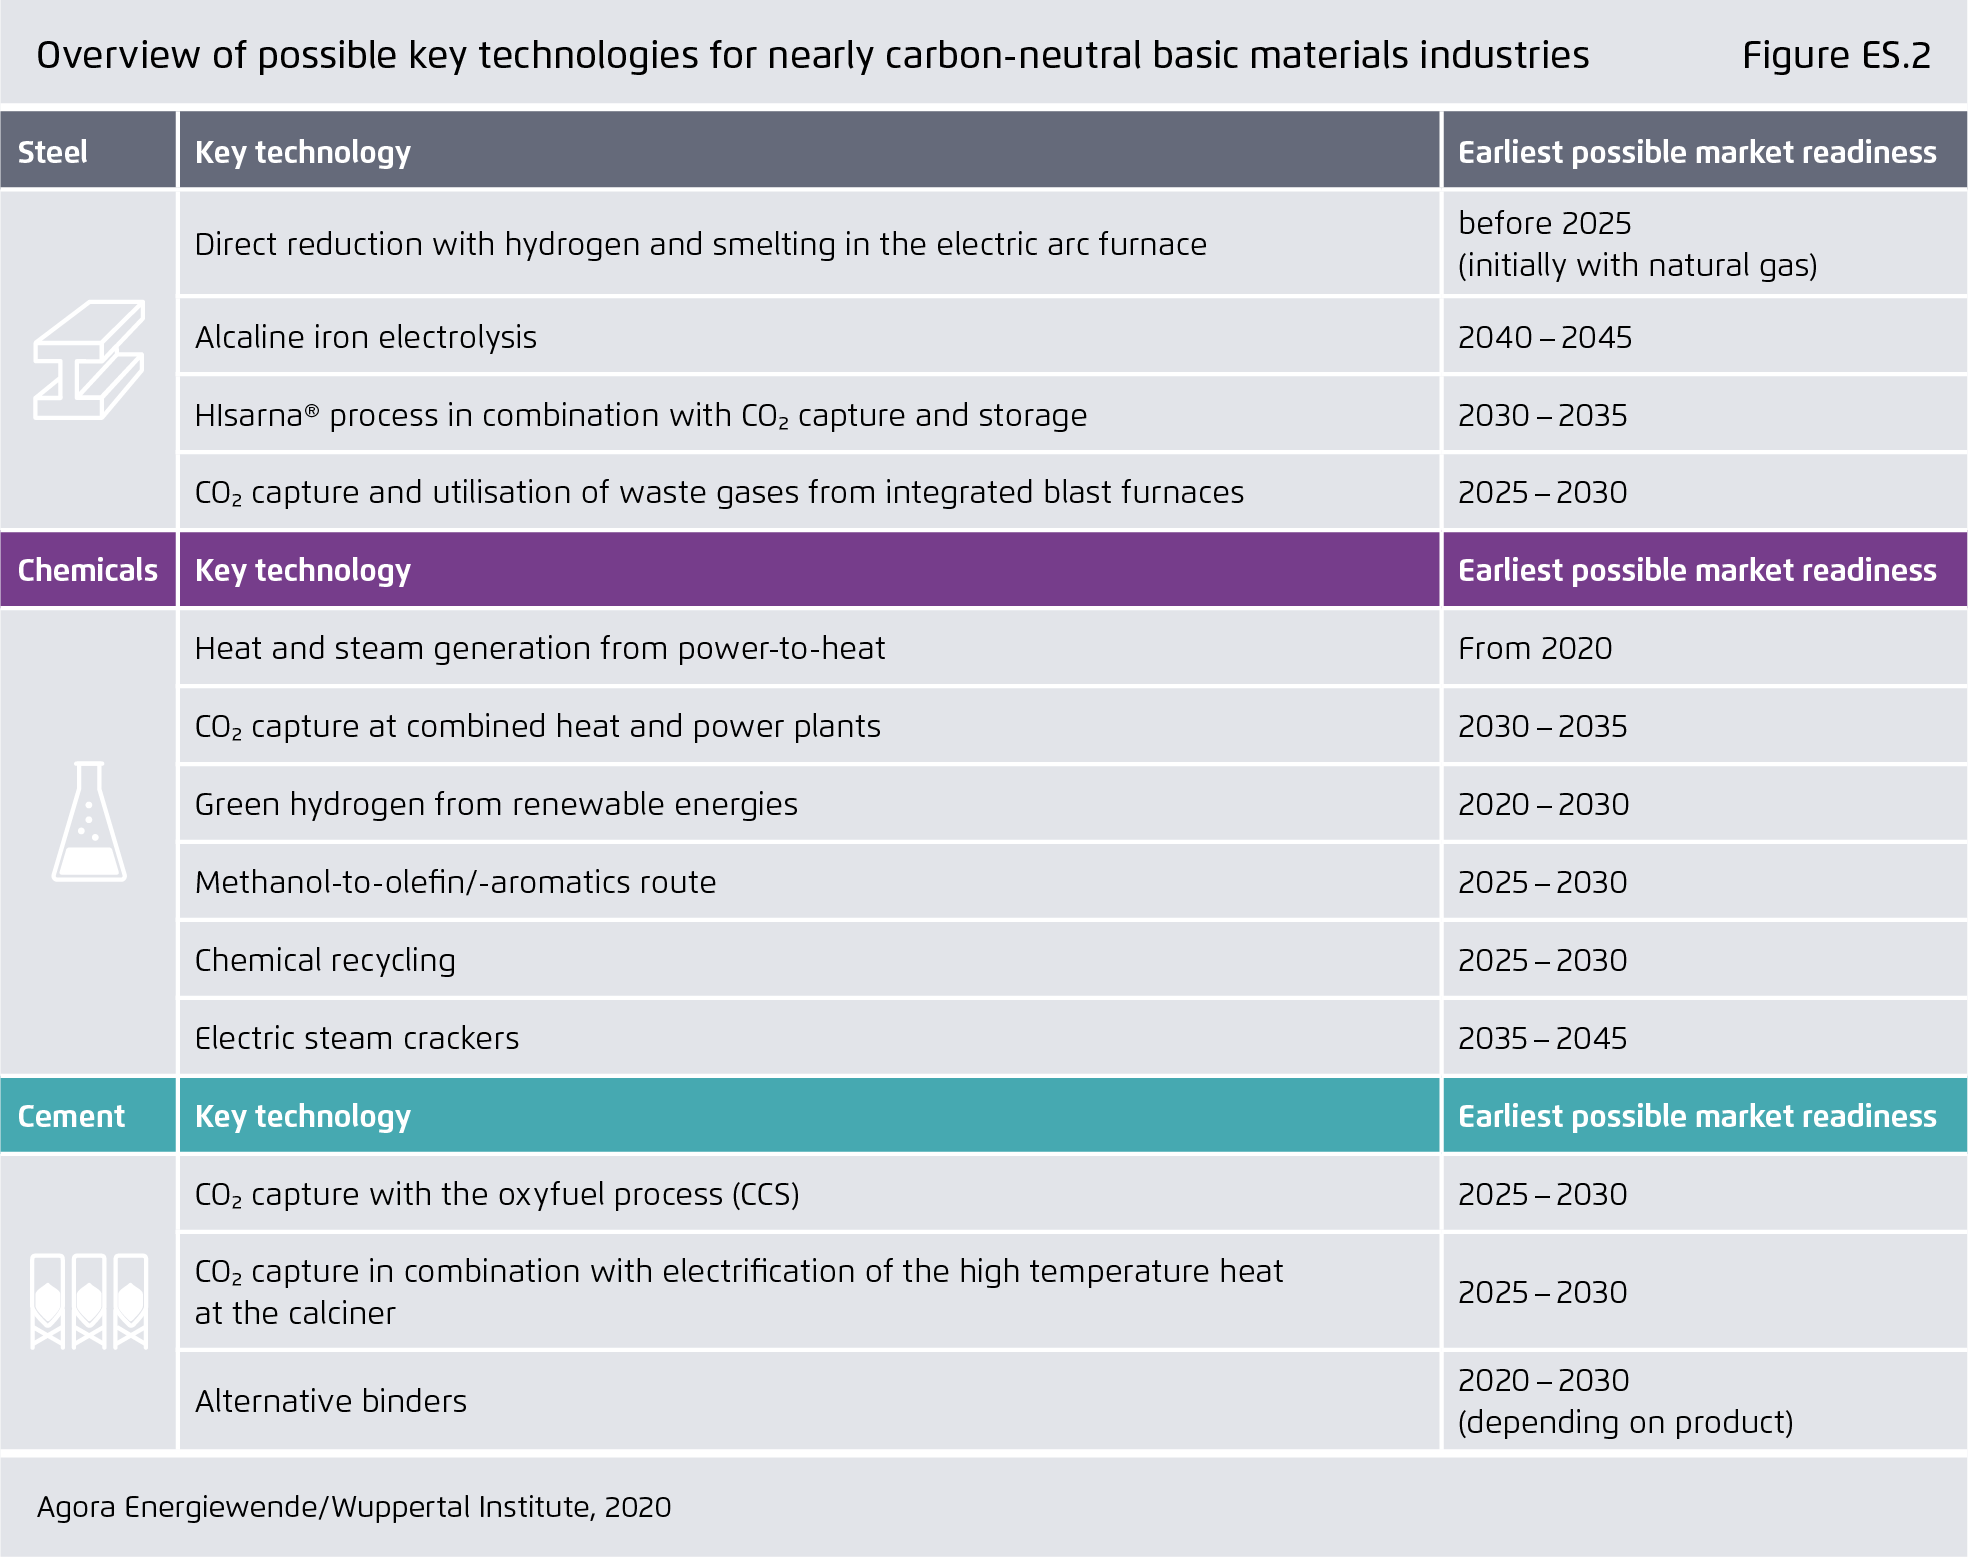 Preview for Overview of possible key technologies for nearly carbon-neutral basic materials industries